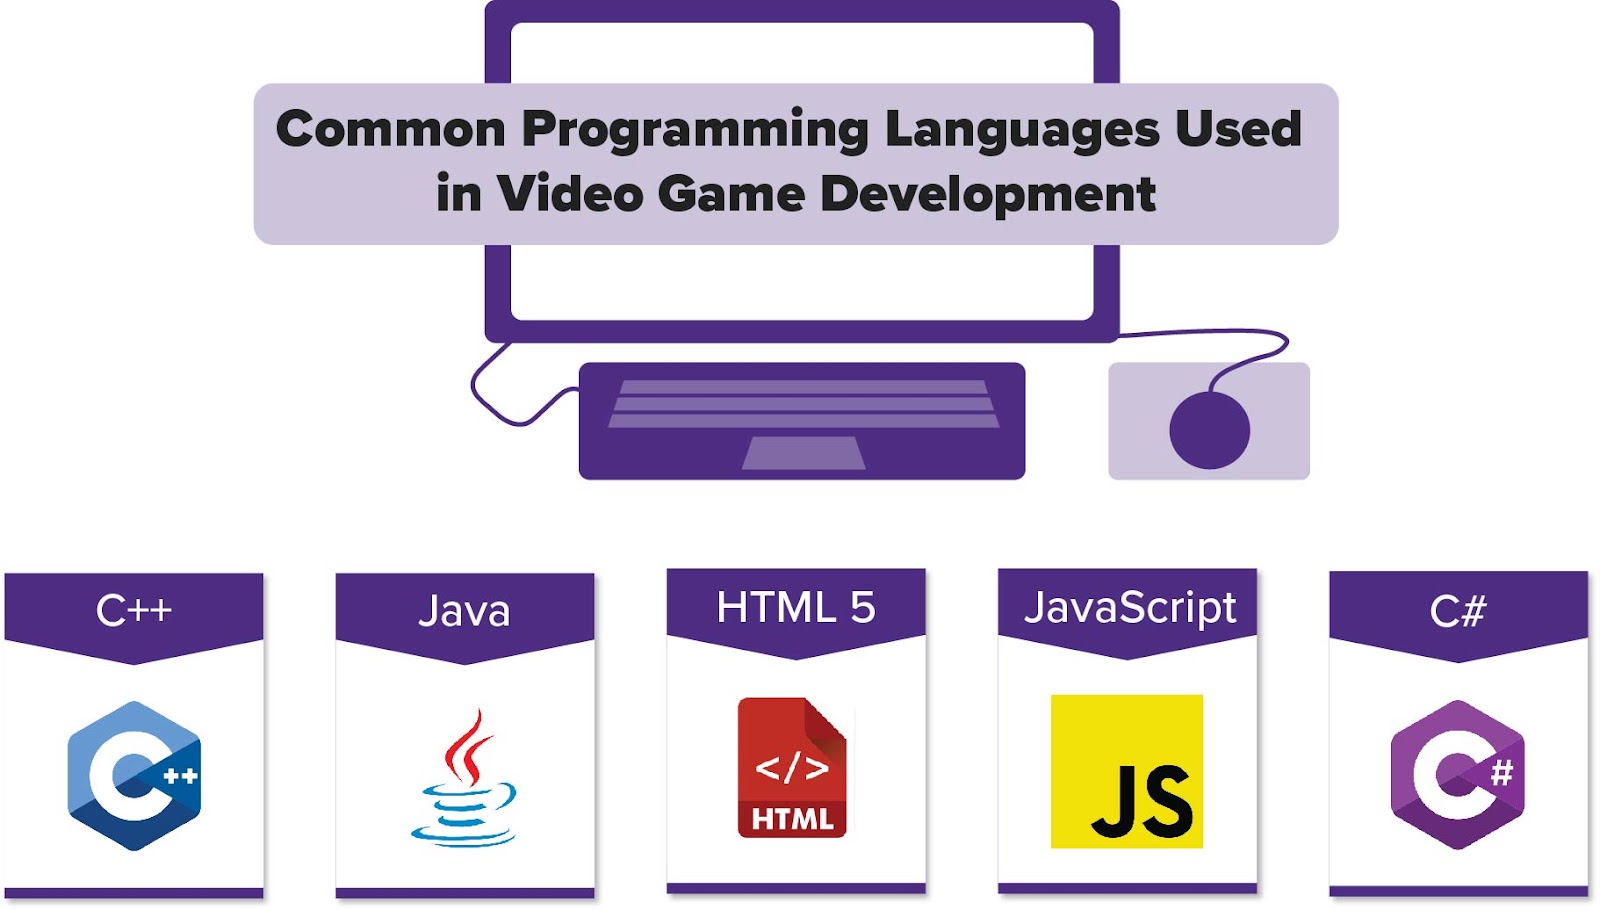 An image showing some of the programming languages used in video game development.